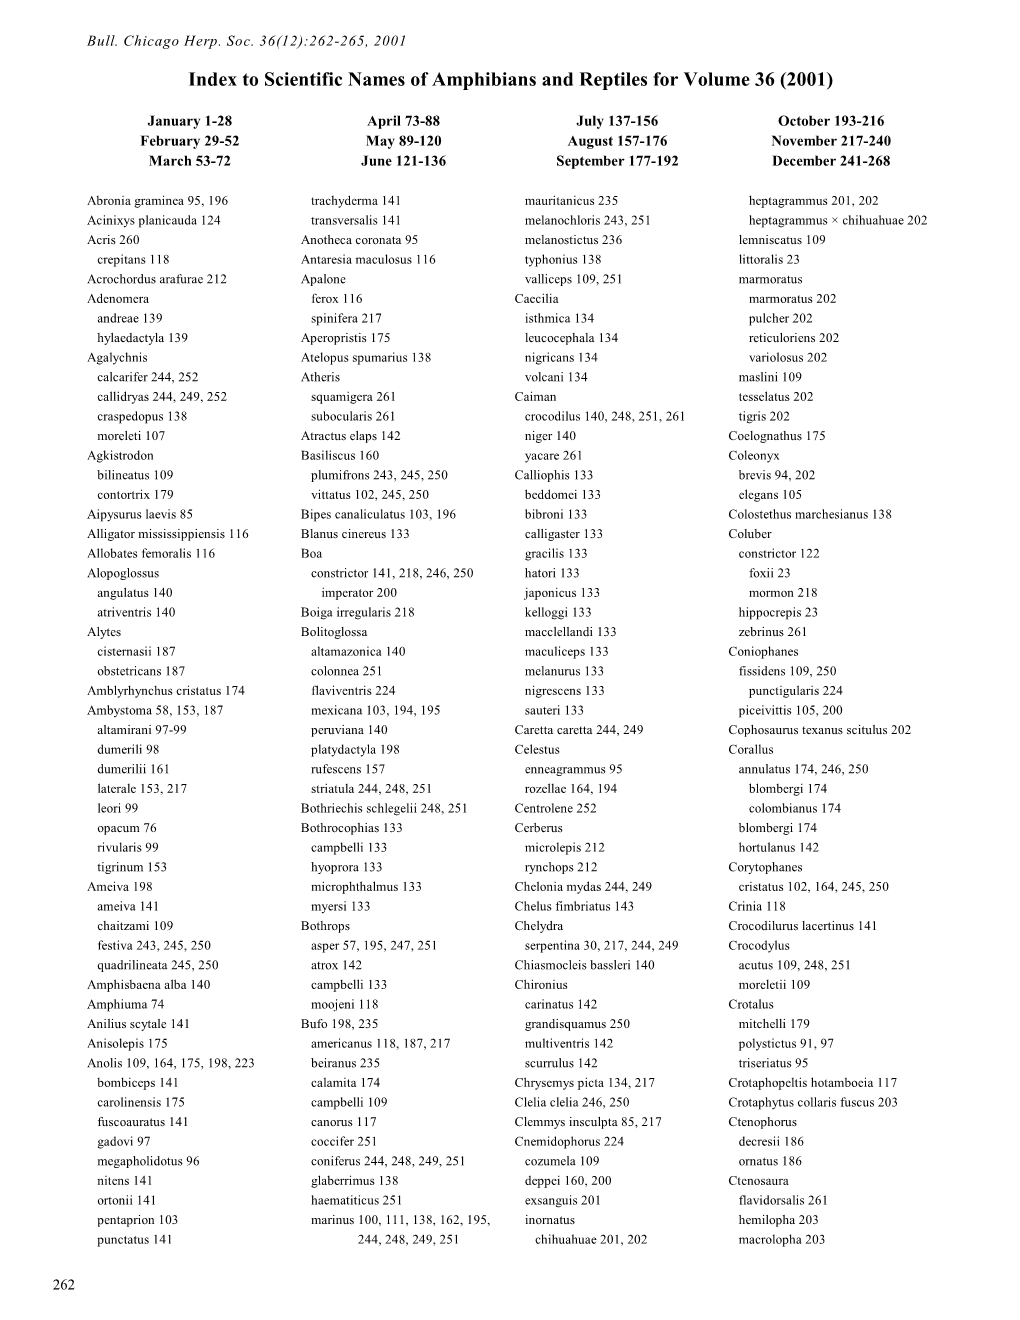 Index to Scientific Names of Amphibians and Reptiles for Volume 36 (2001)